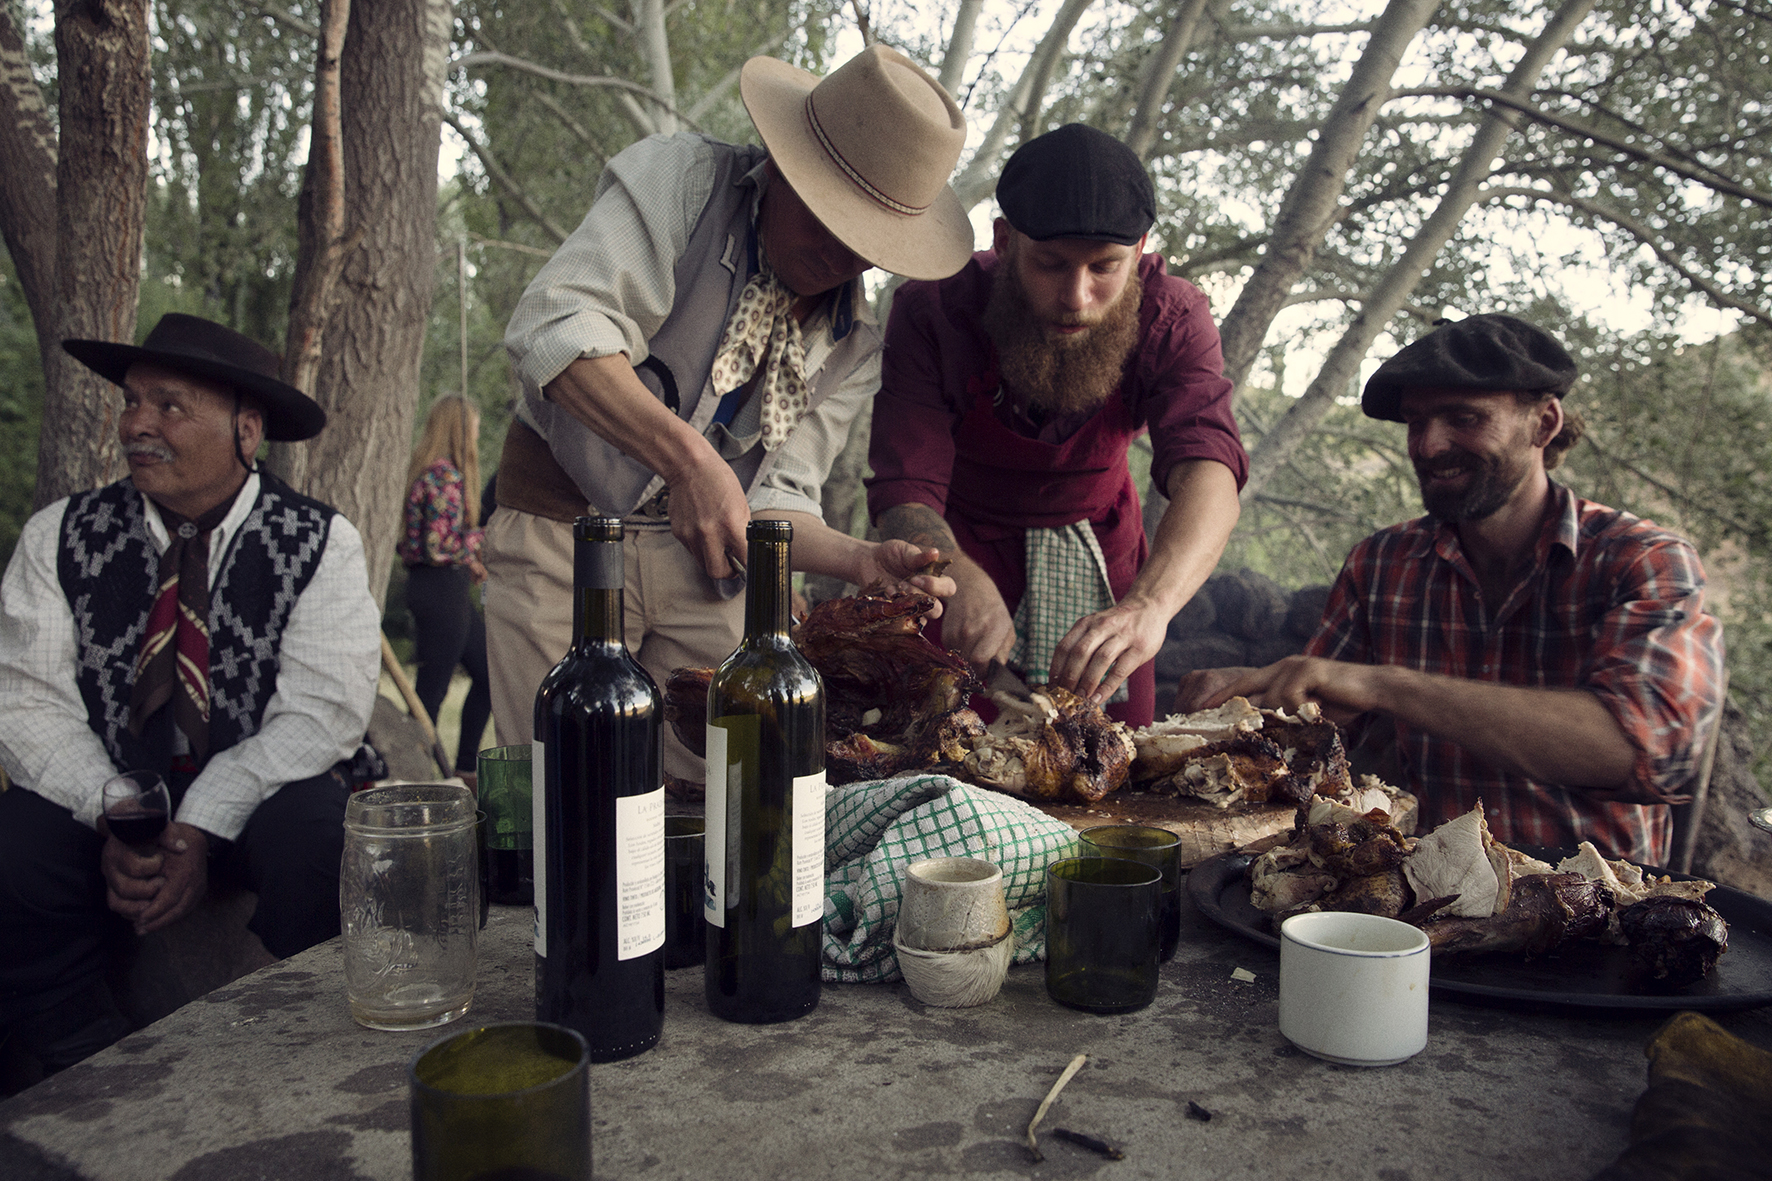 Ranch to table cuisine in Patagonia